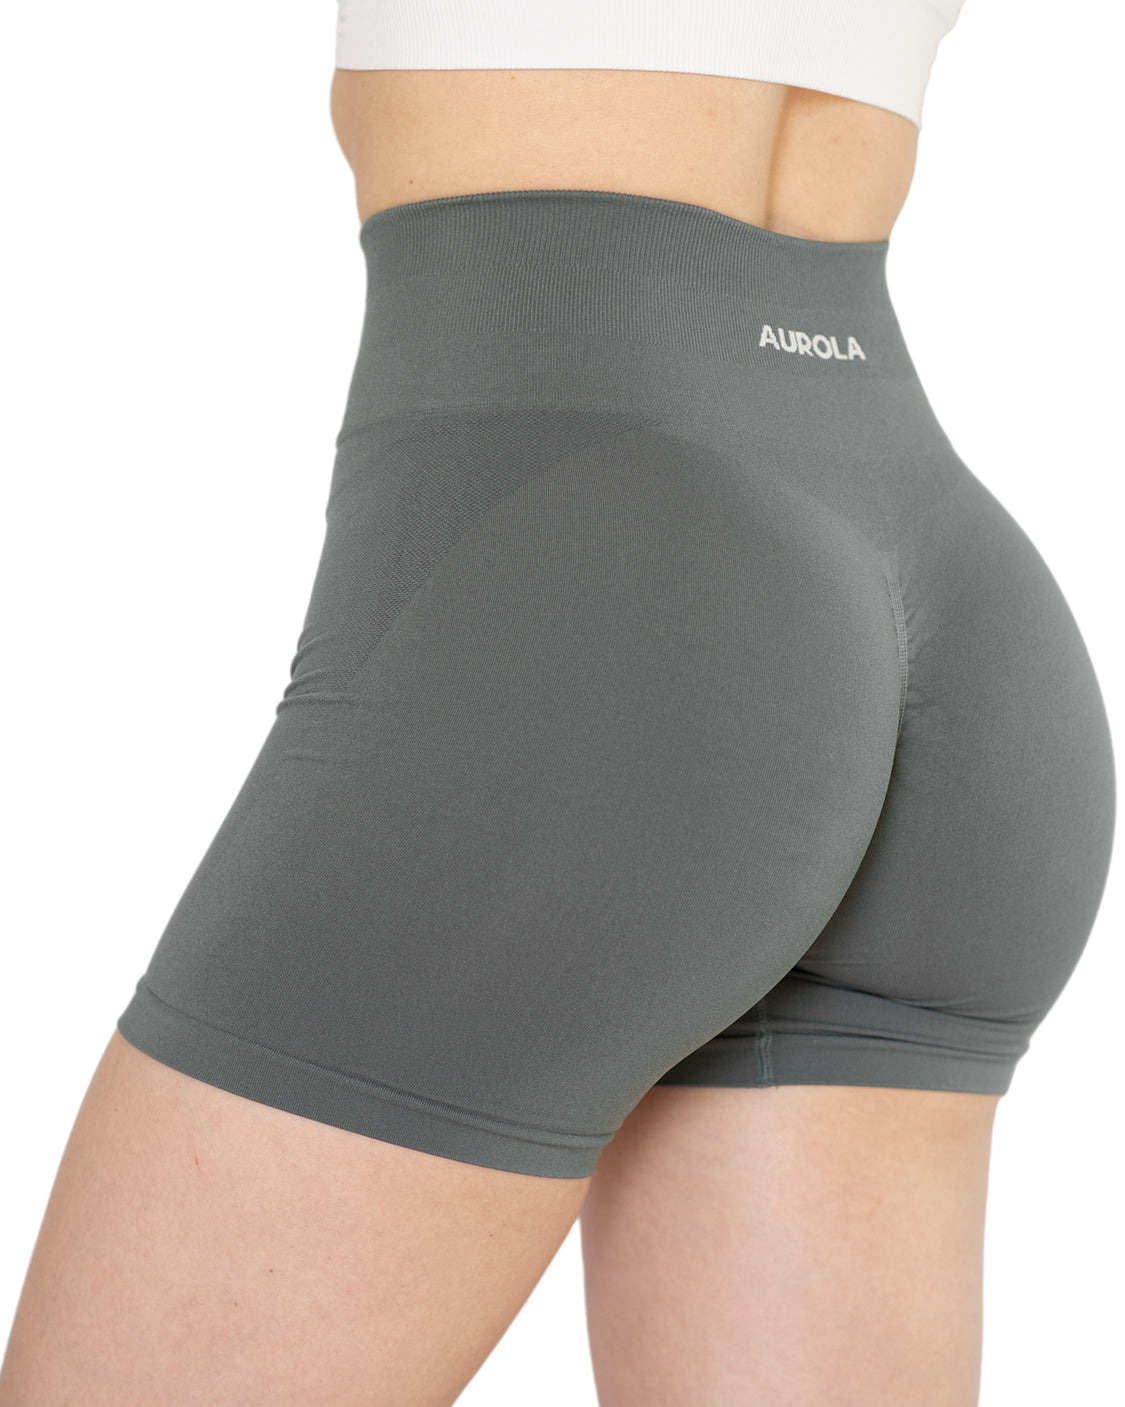  AUROLA 4.5 Dream Workout Shorts For Women Soft Smooth  Comfortable Stretch Active Shorts